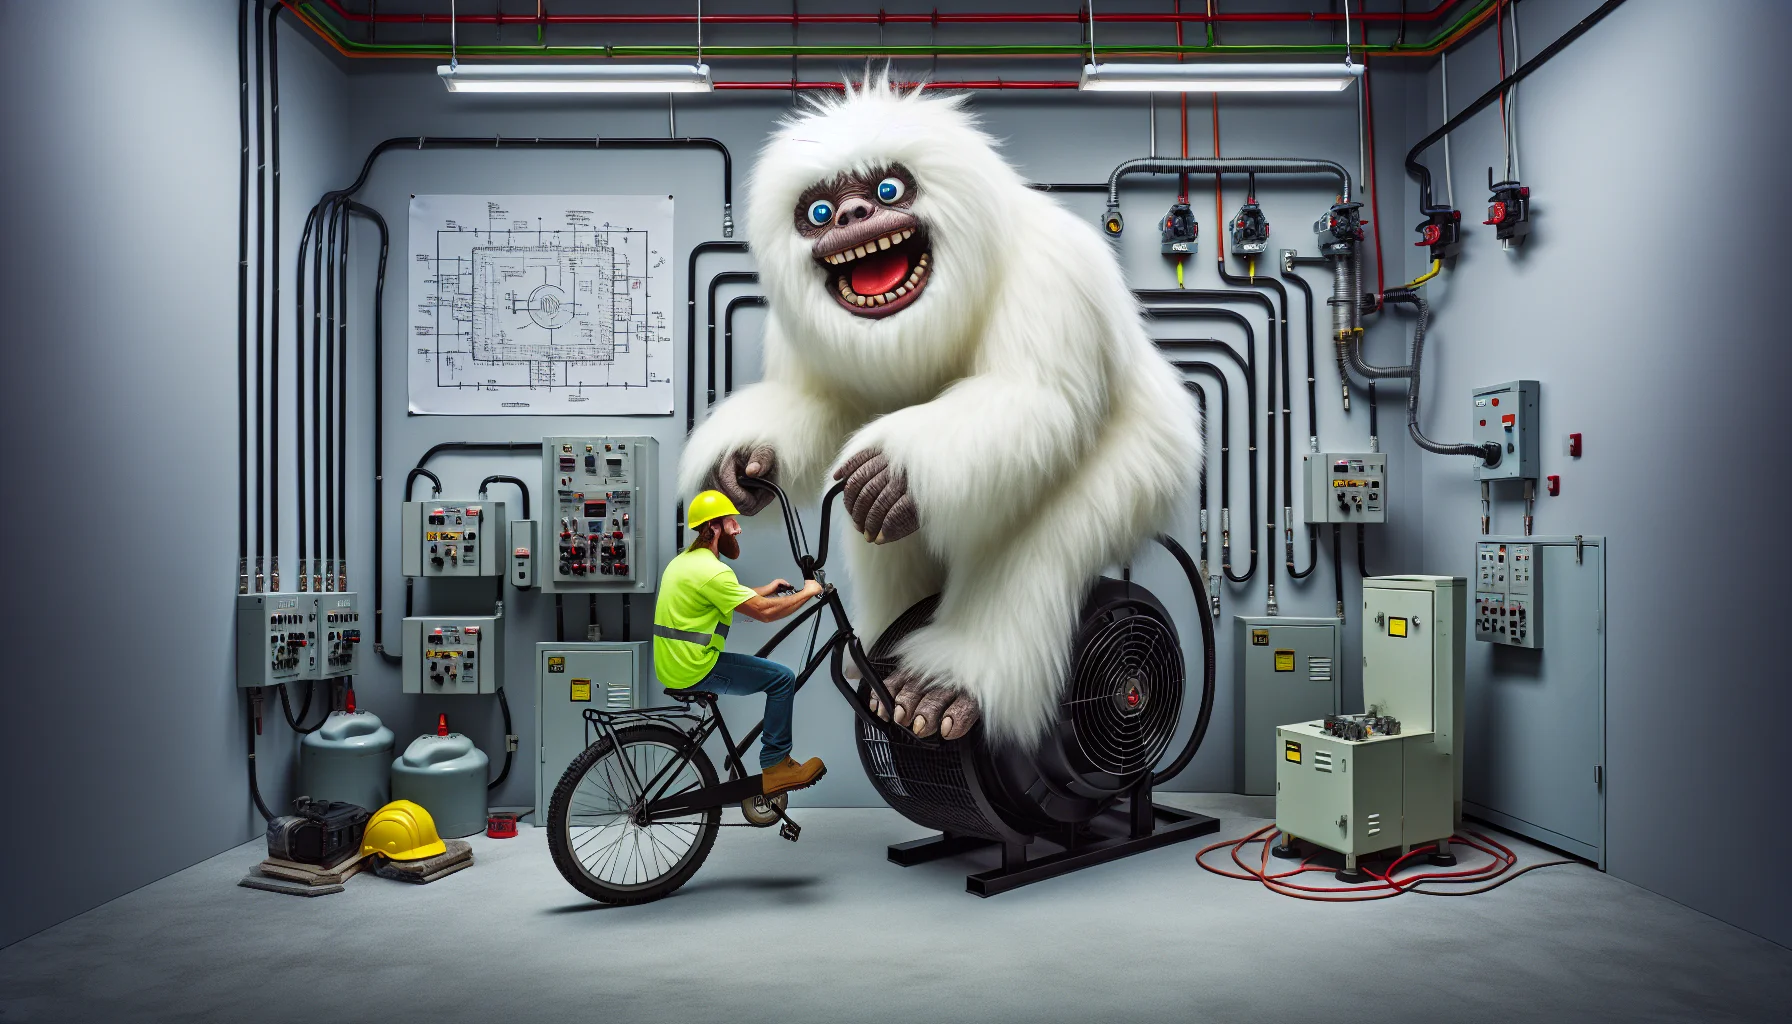 Generate a detailed and realistic image, capturing a quirky scene where a Yeti-like creature contributes to electricity generation. This large creature, fuzzy and white, is pedaling a bicycle that is attached to a large generator. In an amusing twist, it is wearing a safety helmet and a neon yellow construction vest, attempting to blend into a human workspace. Despite being beaming with joy, it is unable to hide its size, which dwarfs nearby objects. The background includes electrical equipment, wire diagrams, and maybe even a lit bulb to indicate electricity generation.